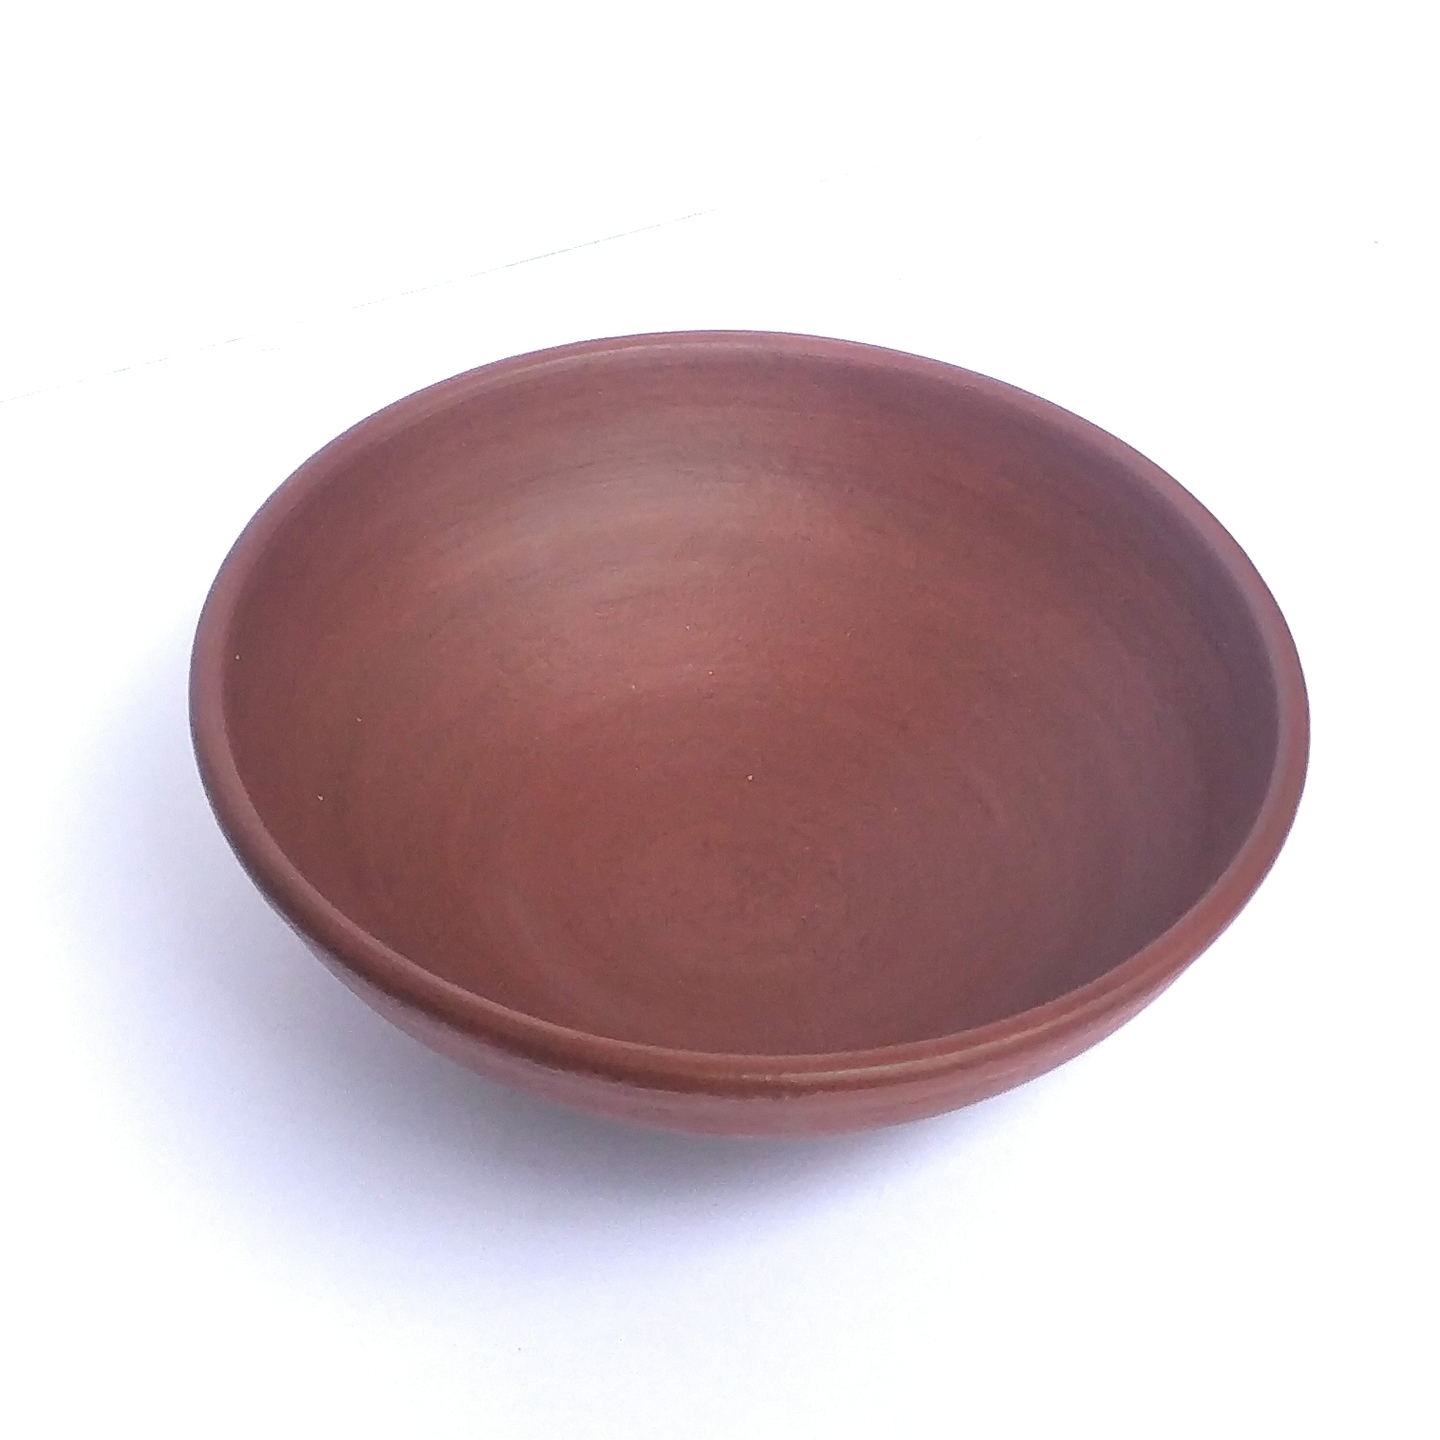 Earthling All Natural Clay Serving Bowl 10 inch